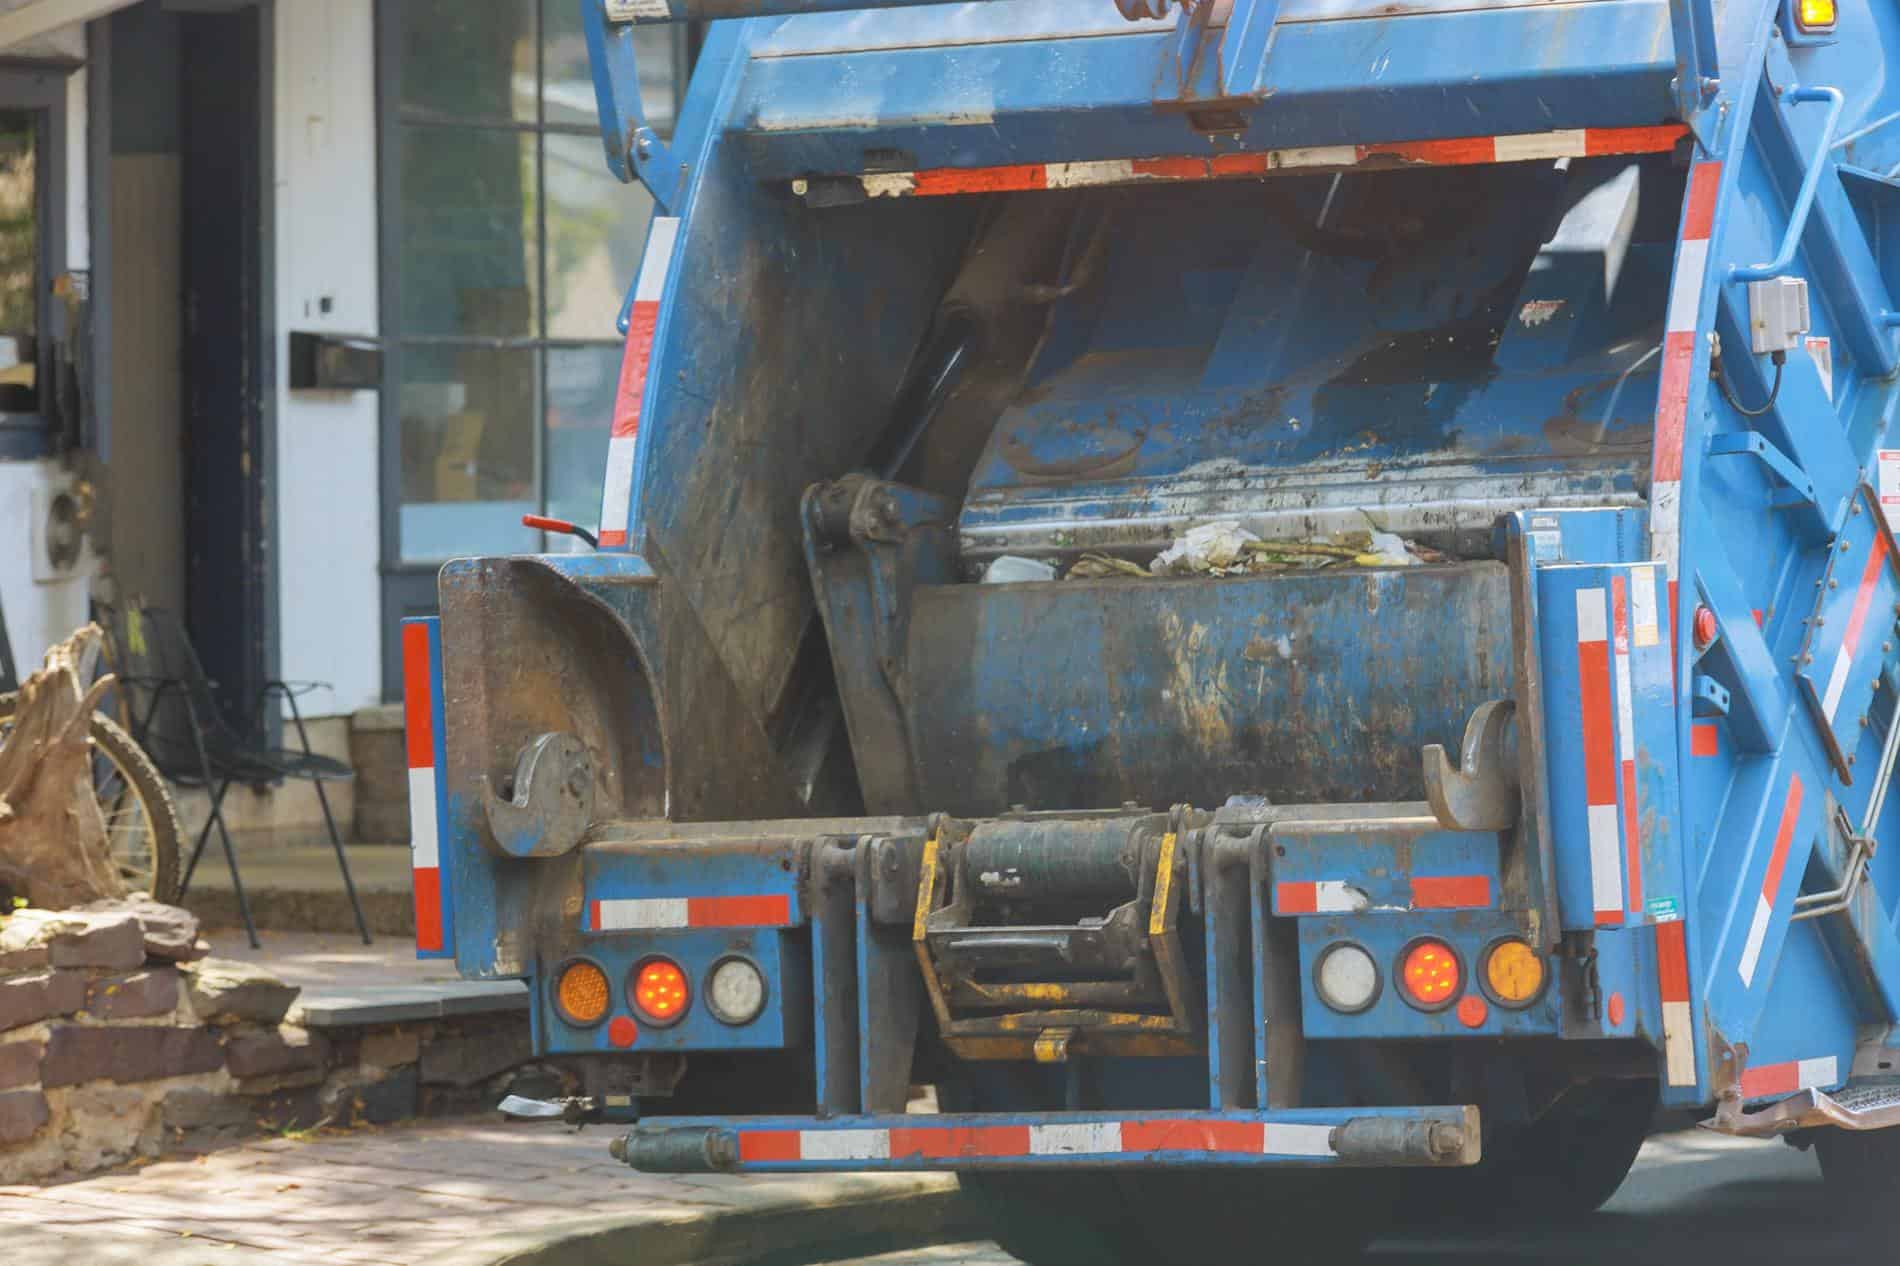 Omicron spike having impact on waste collection